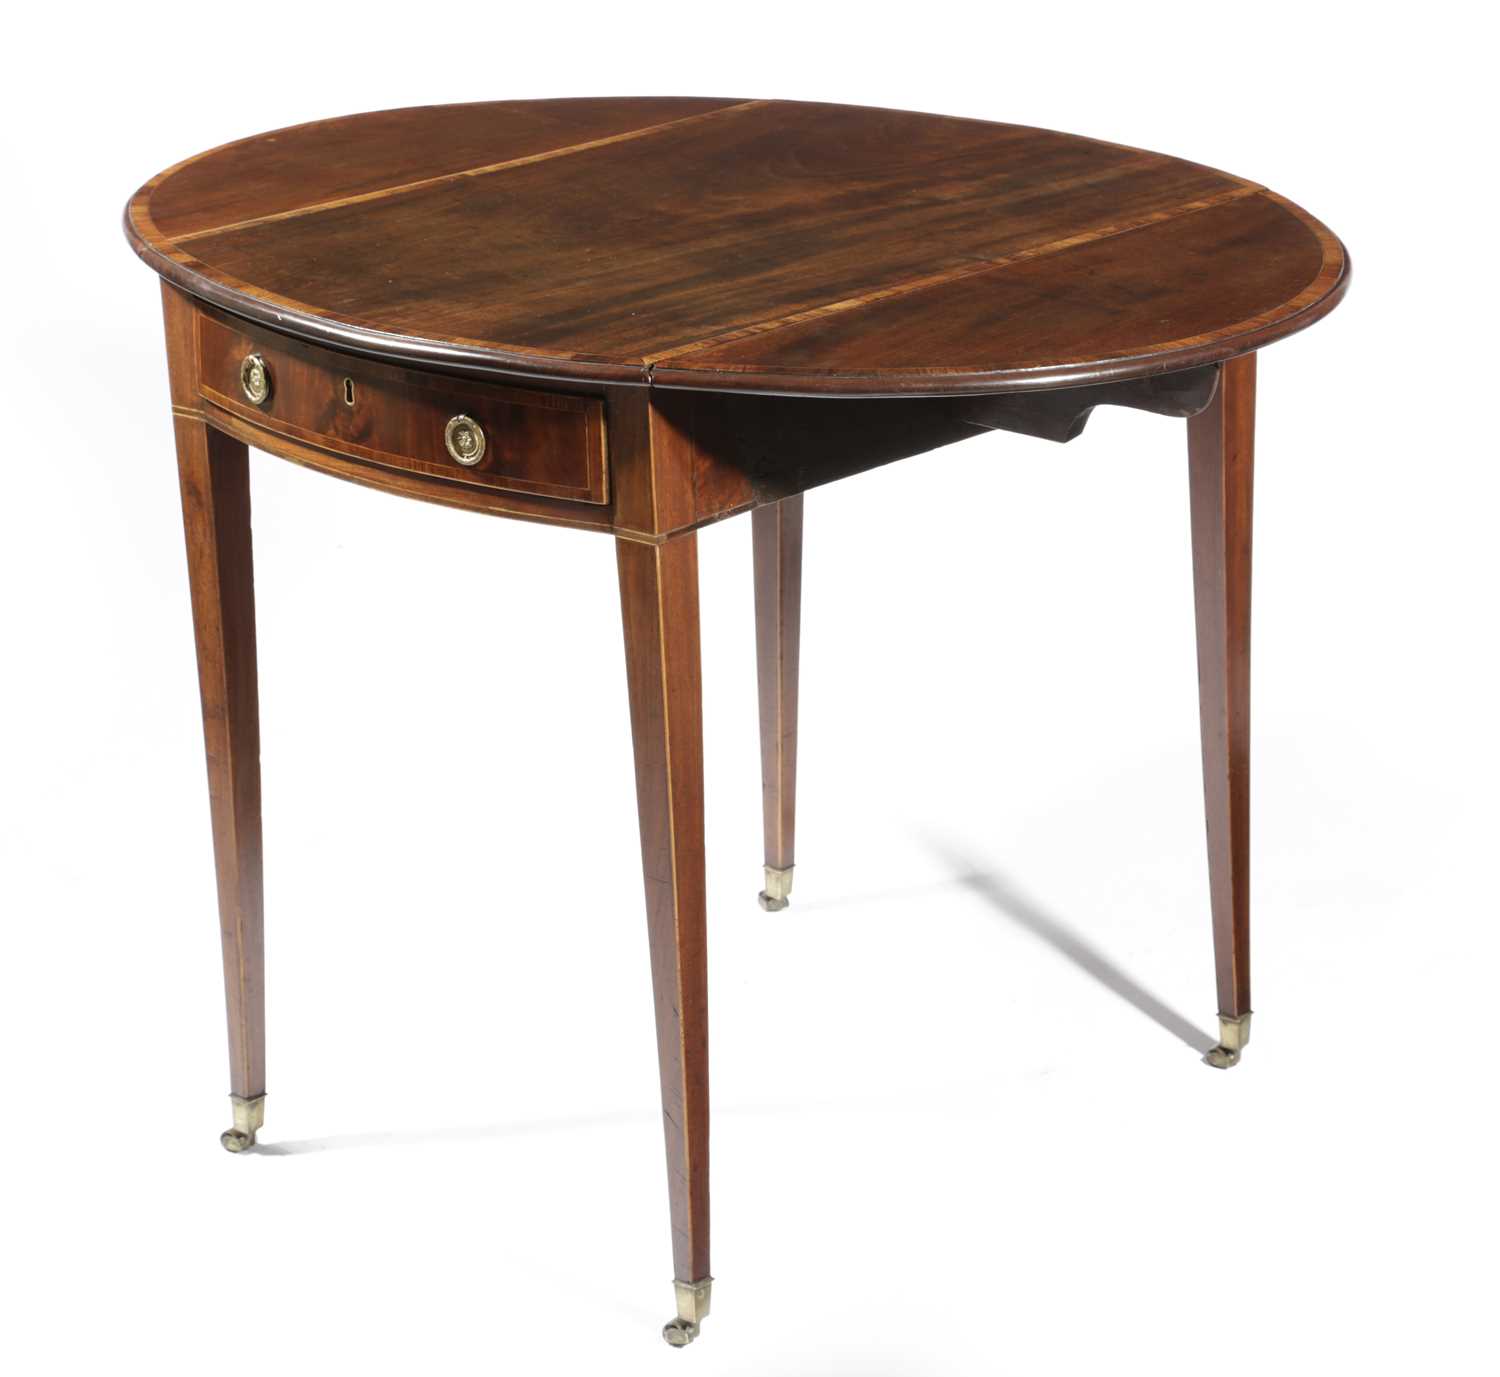 A GEORGE III MAHOGANY PEMBROKE TABLE C.1790-1800 with a crossbanded oval top above a bowfront frieze